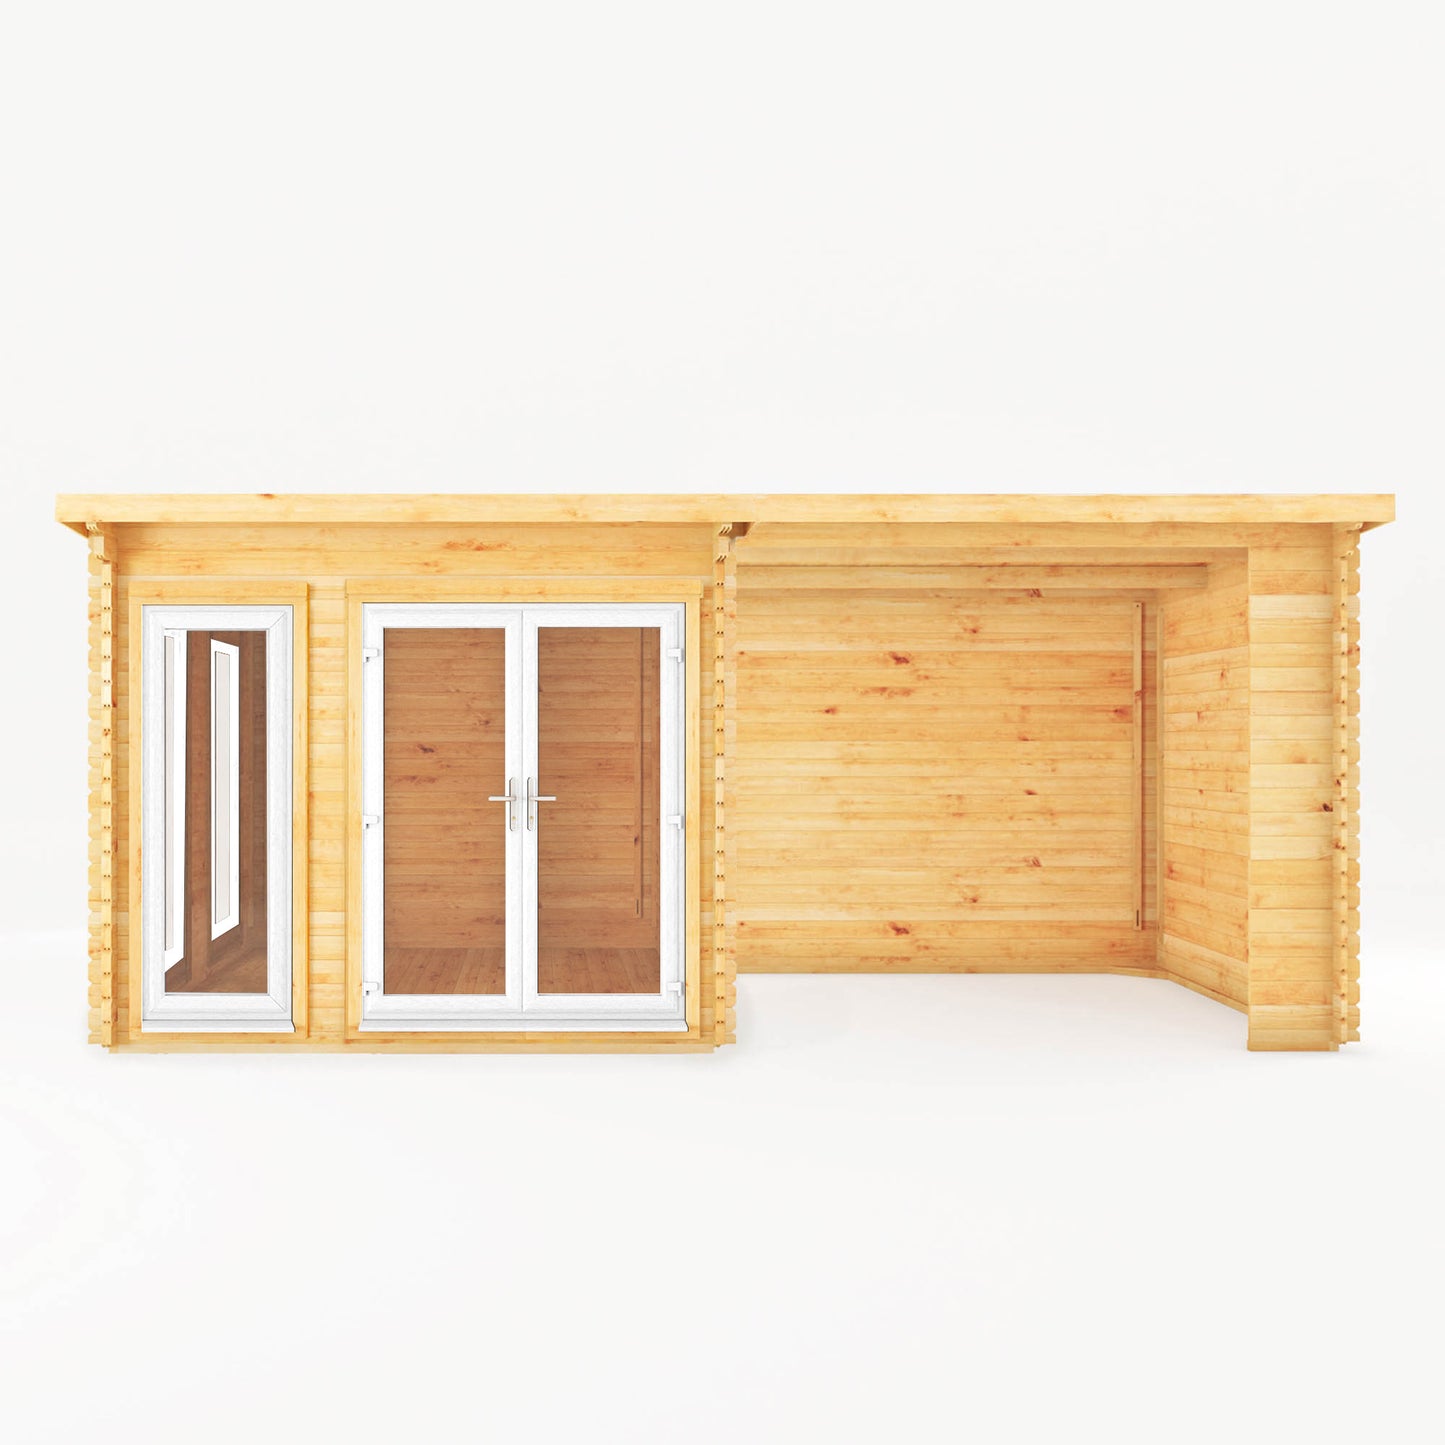 The 6 x 3m Wren Log Cabin with Patio Area and White UPVC